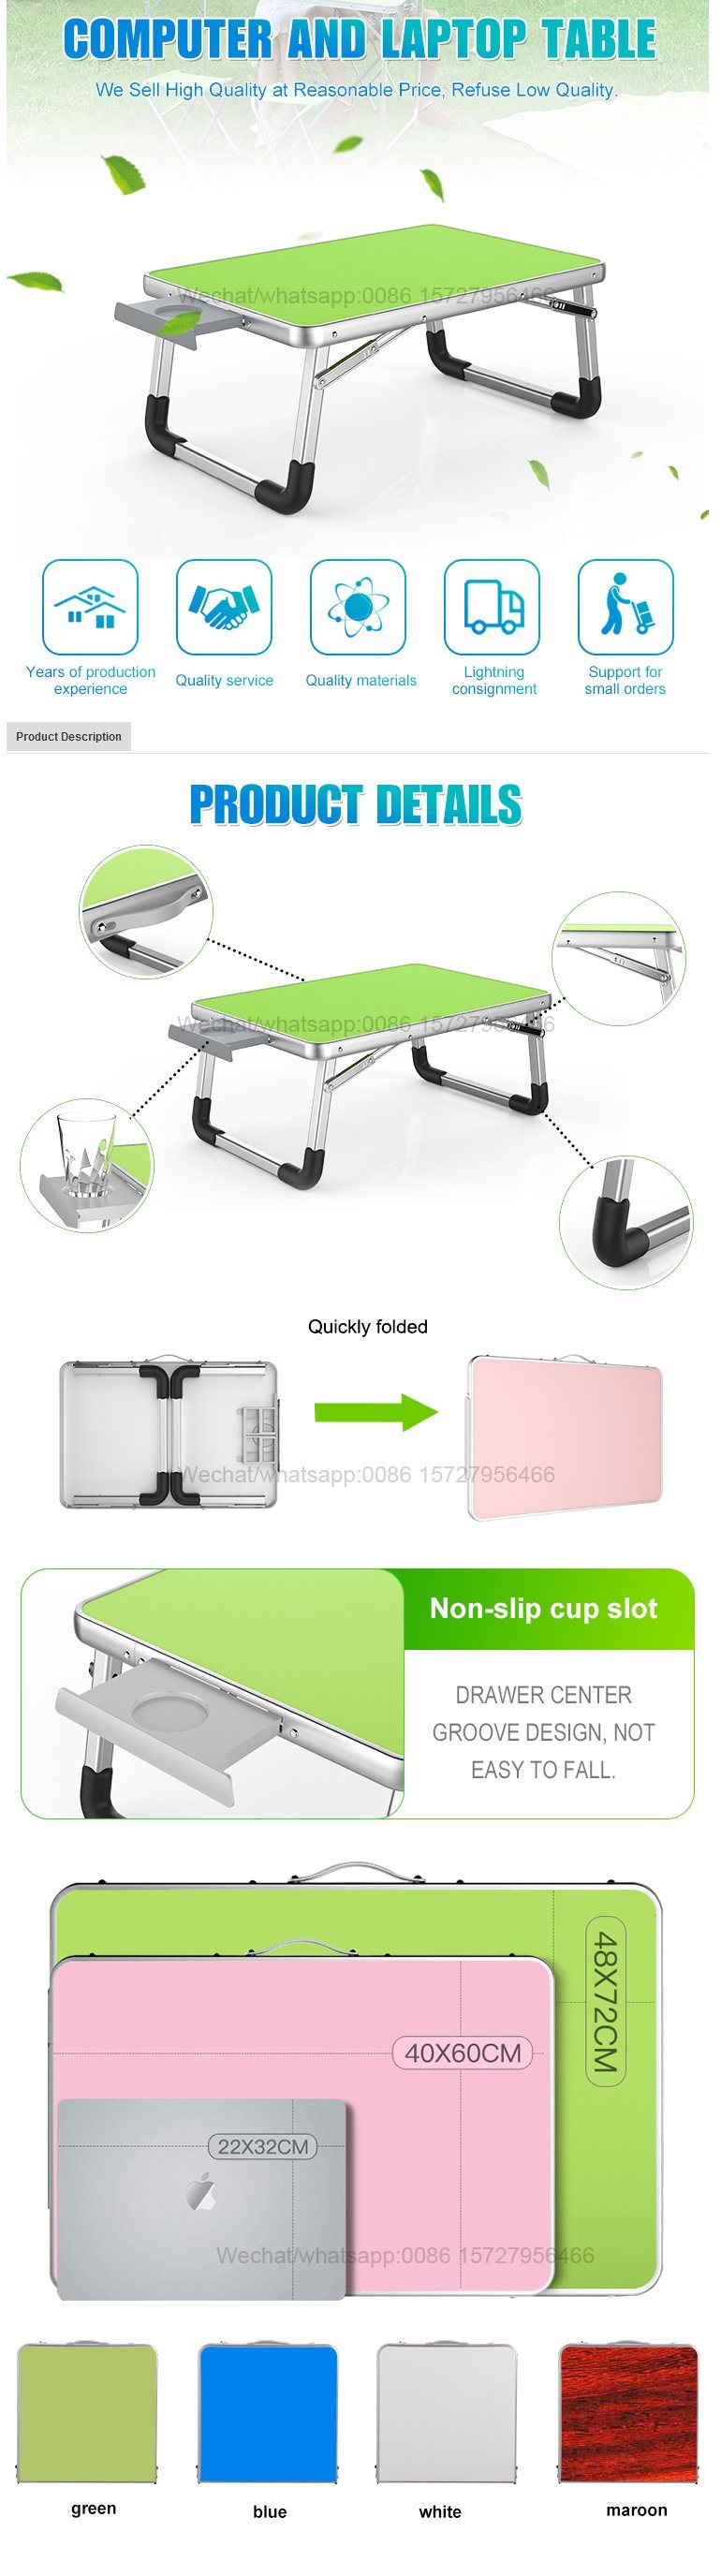 Laptop Bed Tray Lap Desk Foldable Portable Standing Breakfast Reading Camping Tray Holder for Couch Floor Students Kids